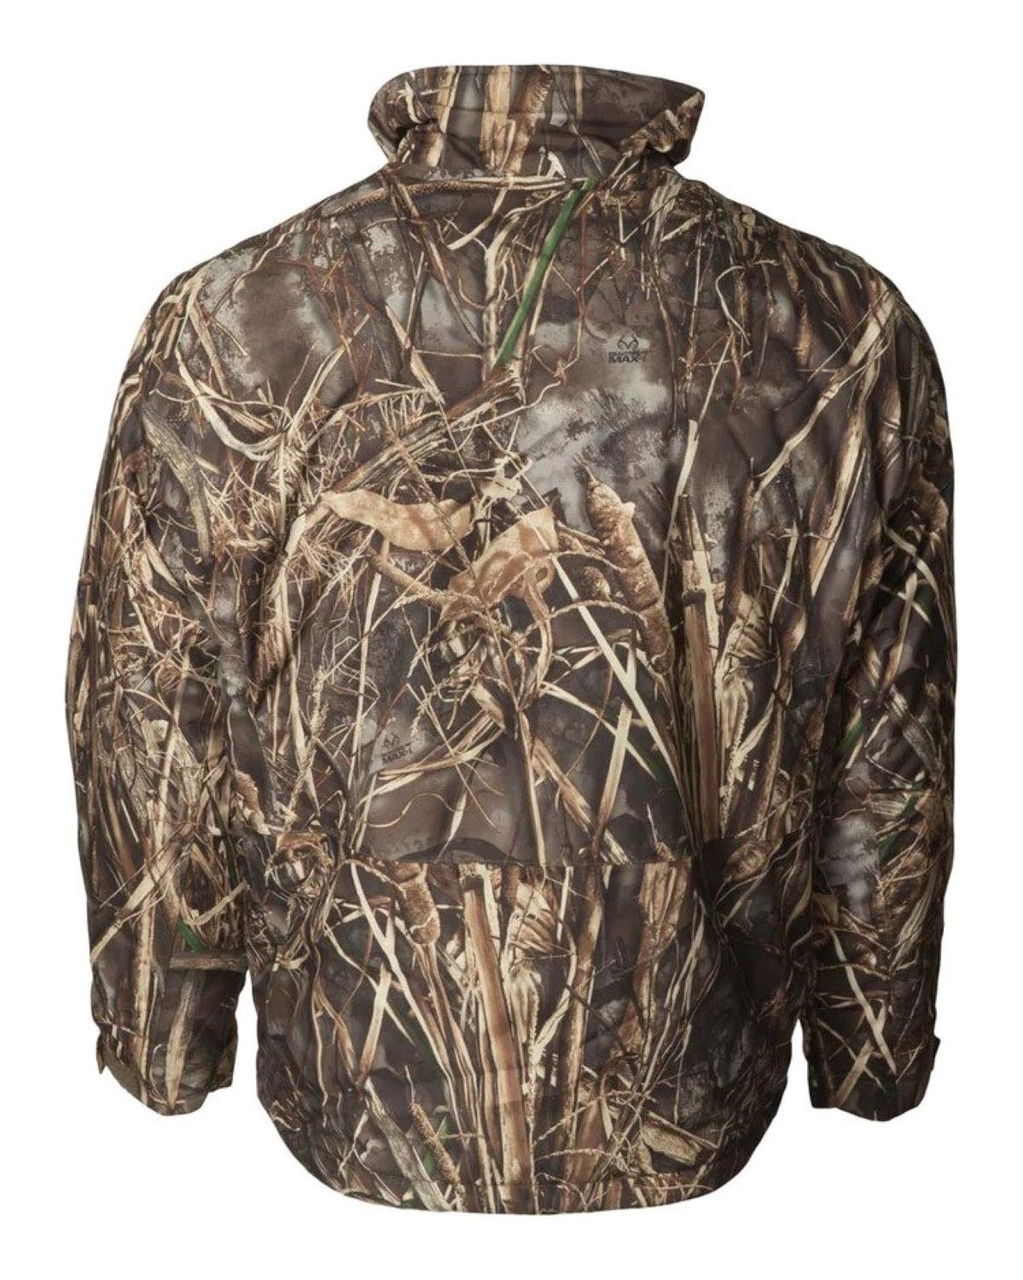 Banded Avery Originals 1/4 Zip Insulated Pullover - Realtree Max-7 - 2XL